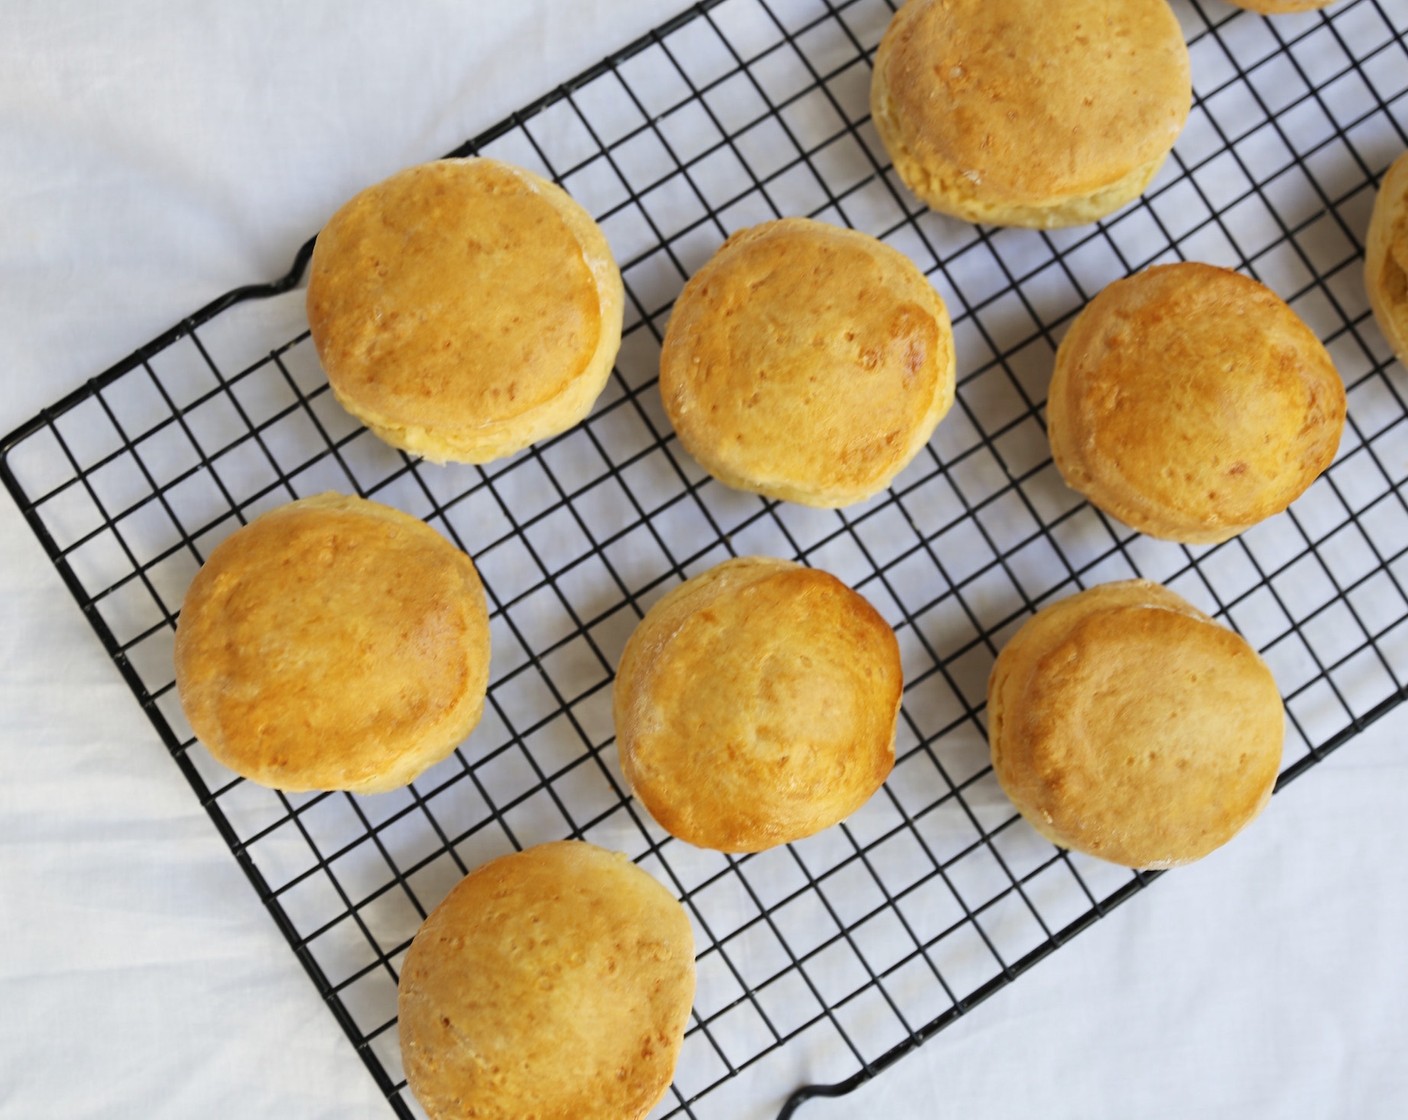 step 9 Cool scones on a wire rack for around 10 minutes. Serve and enjoy!